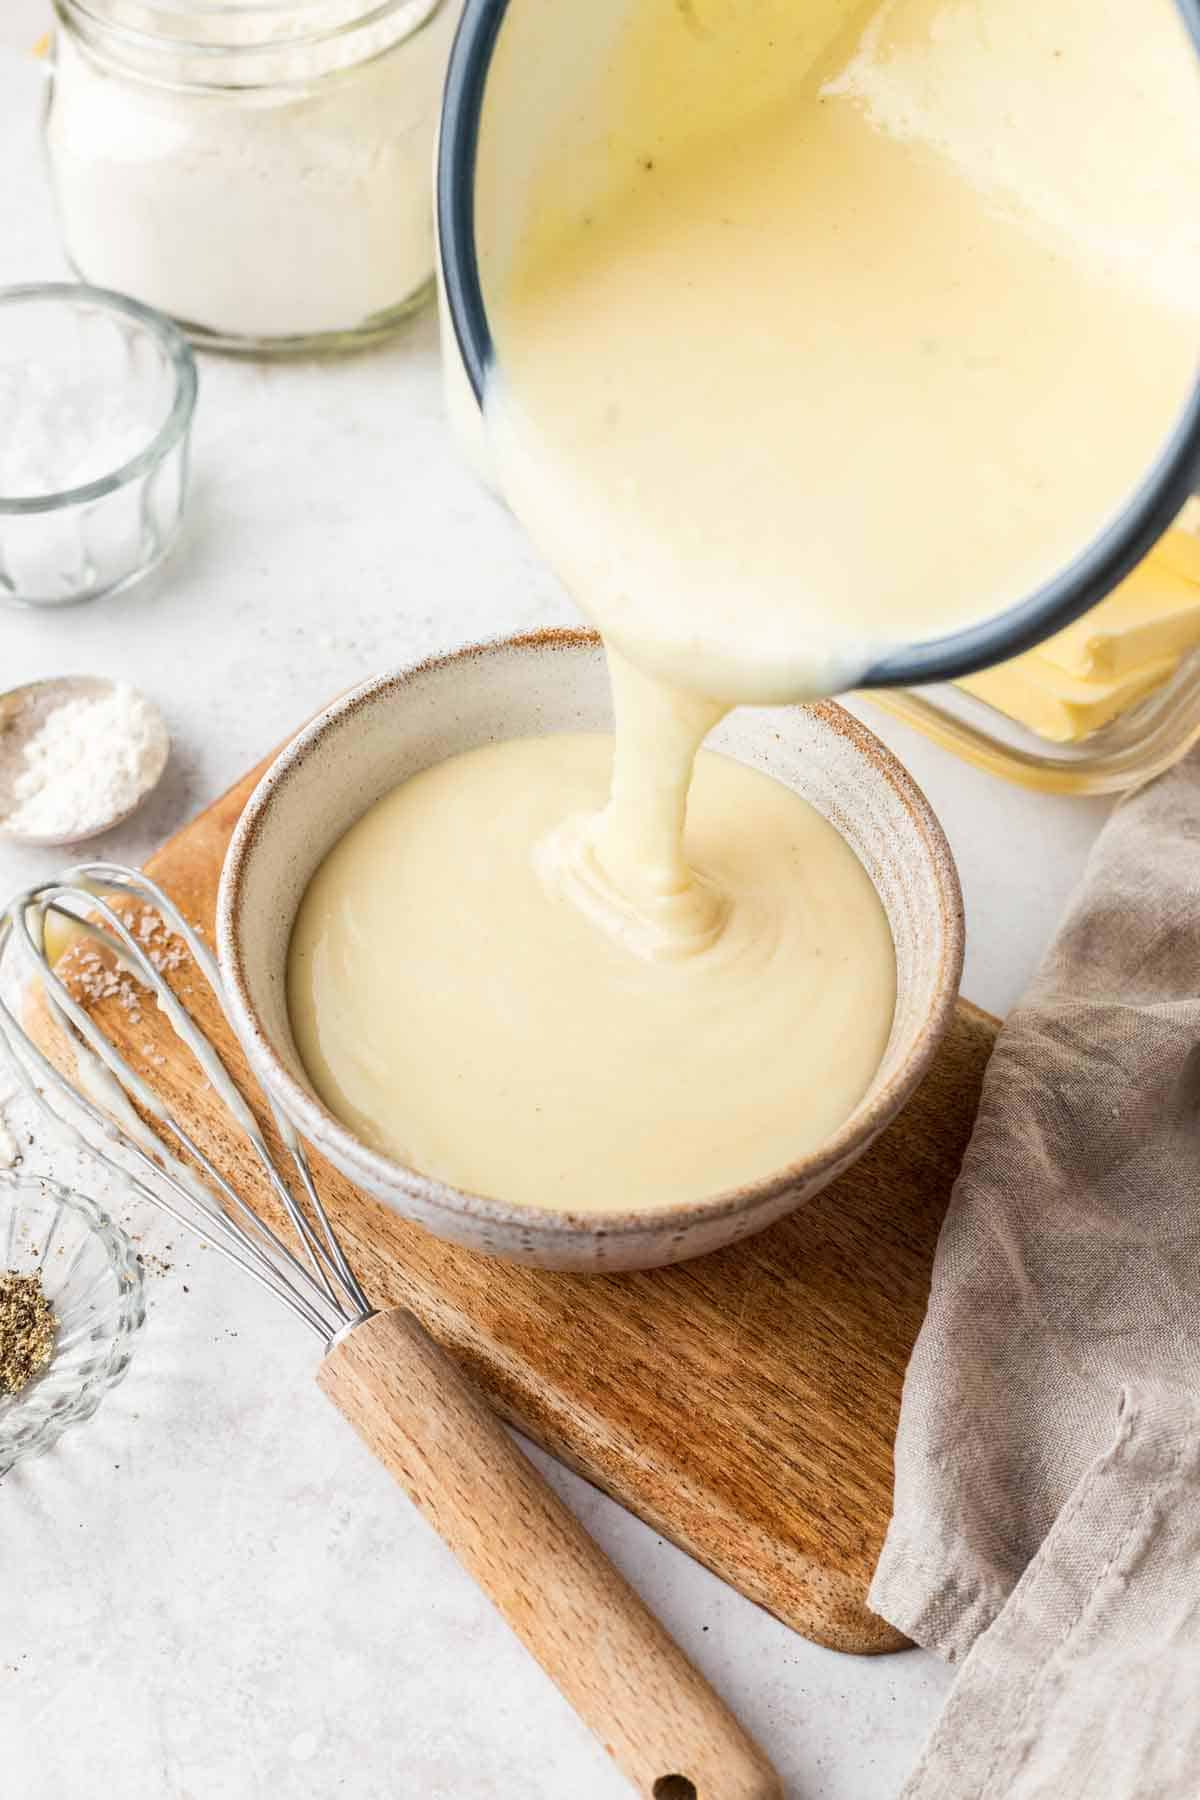 How to Make White Sauce and Cream of Sauces